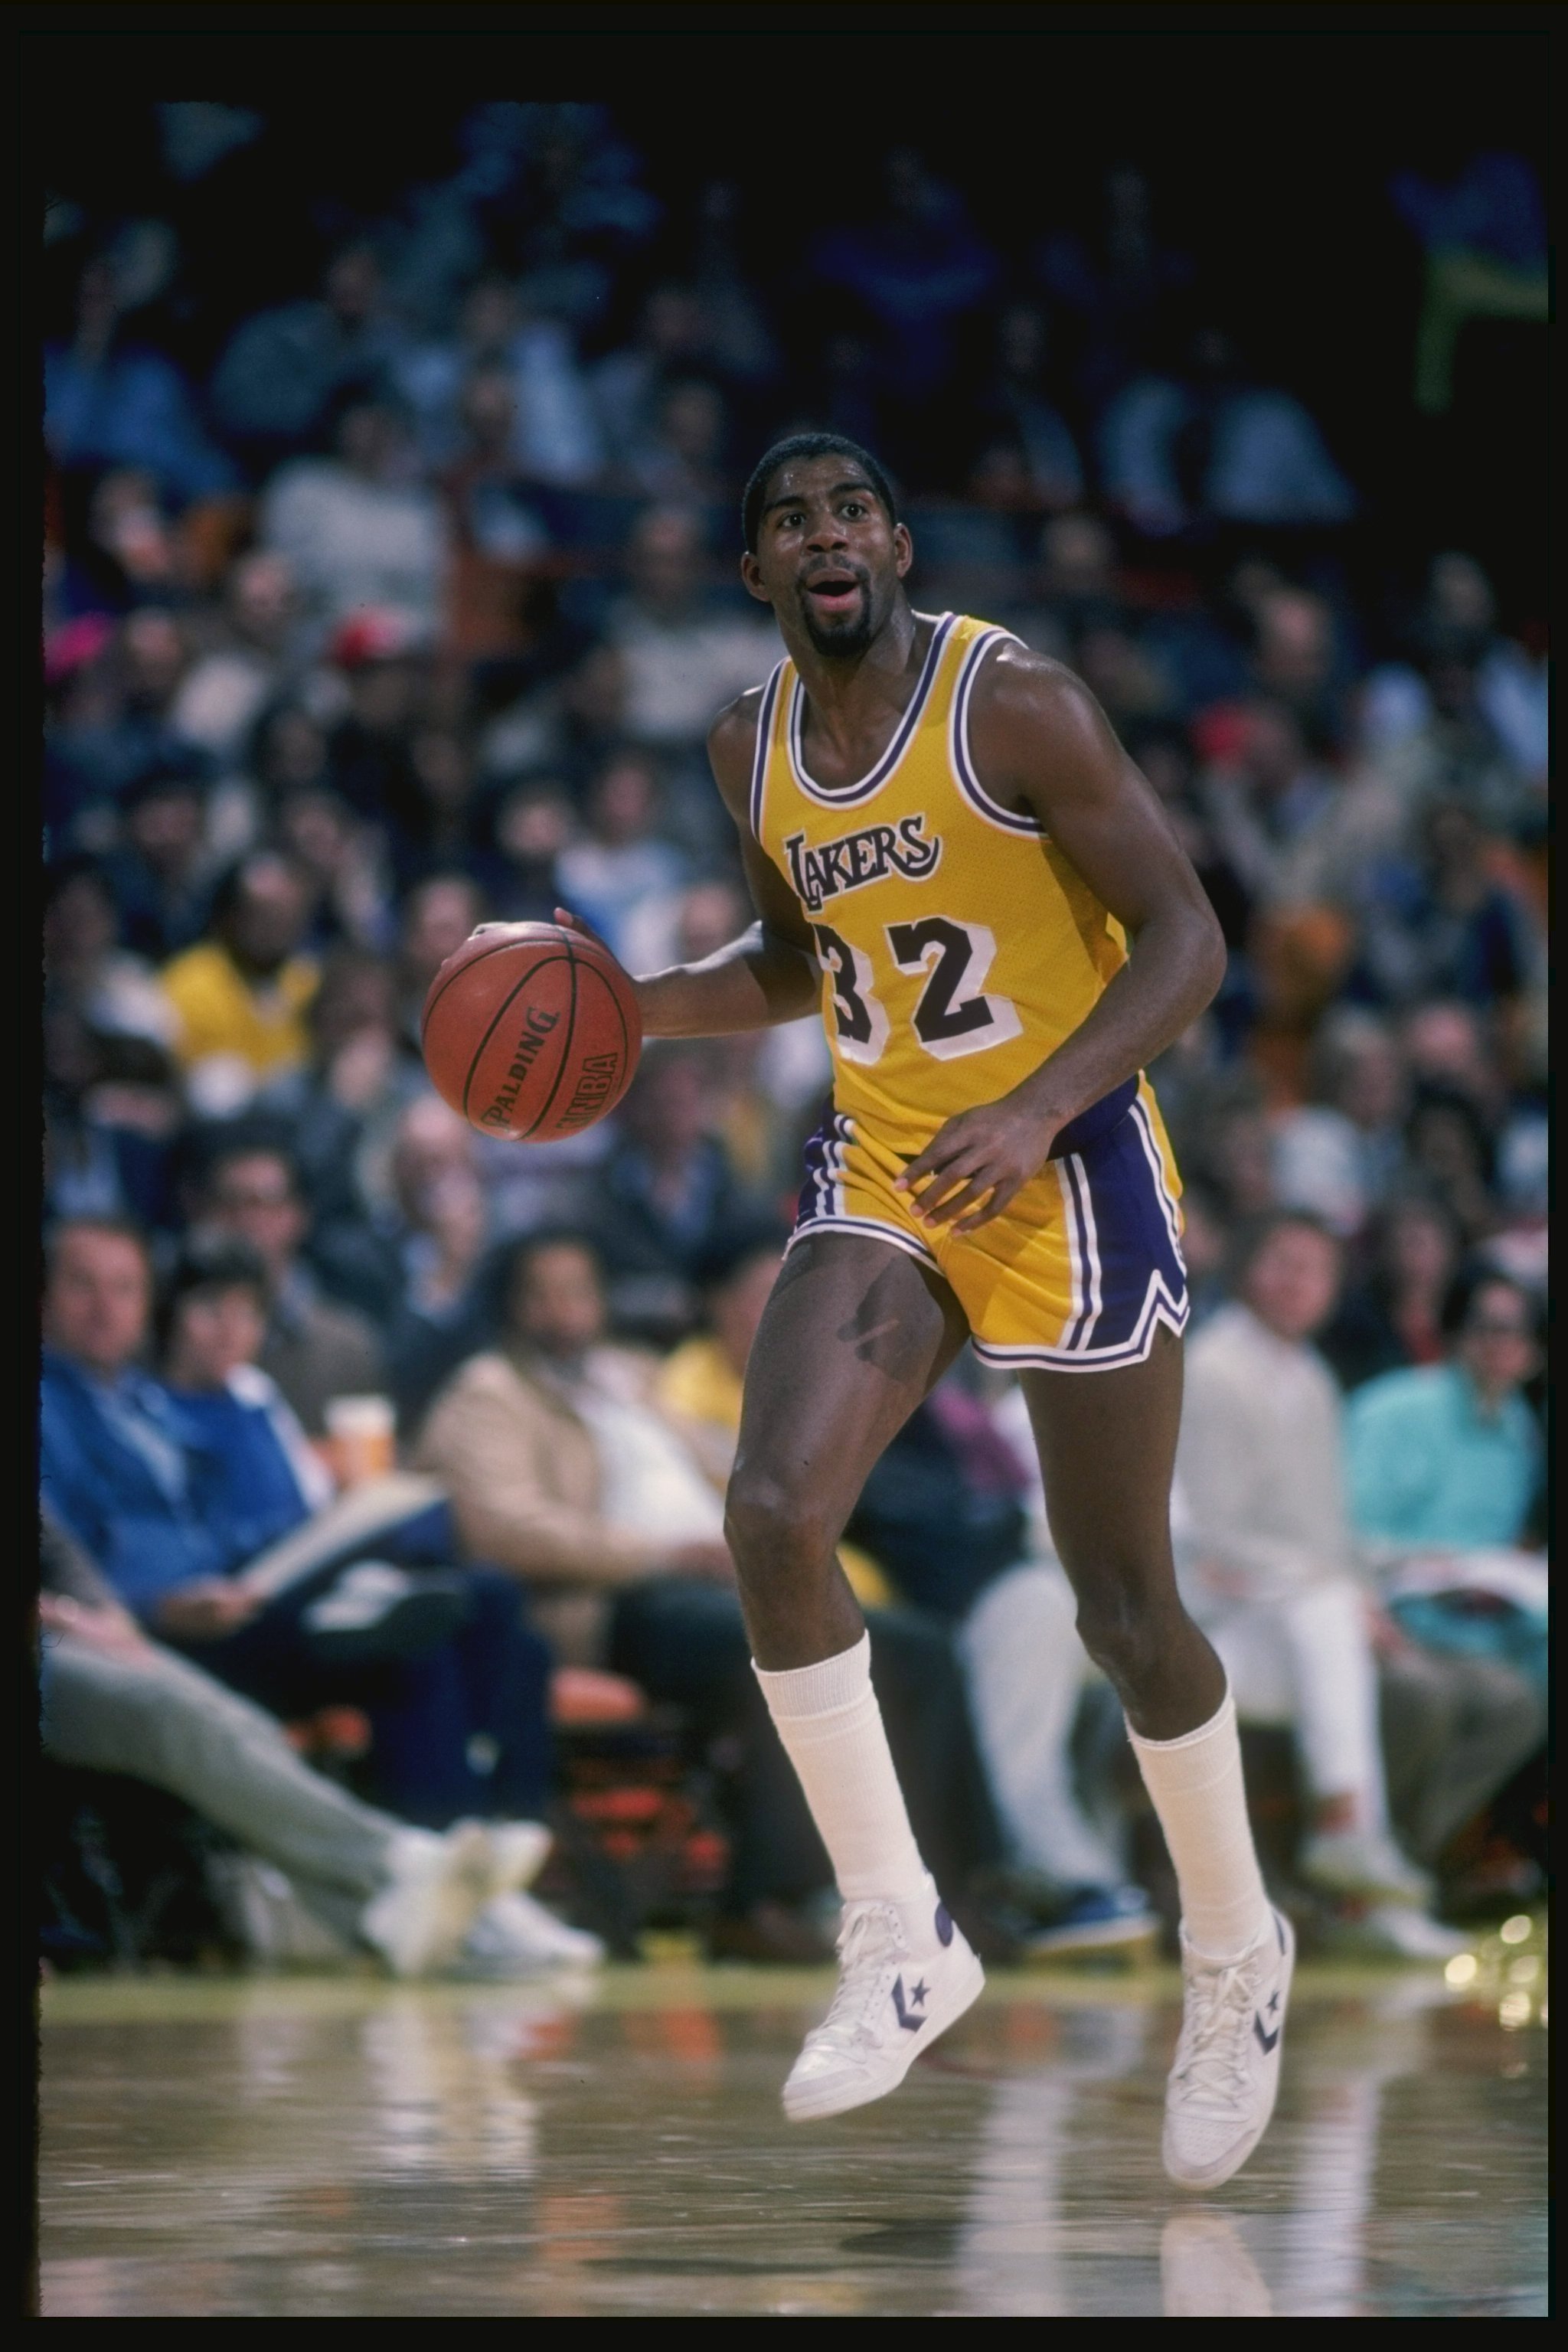 Guard Magic Johnson of the Los Angeles Lakers driibbles the ball down the court during a game at the Great Western Forum in Inglewood, California.